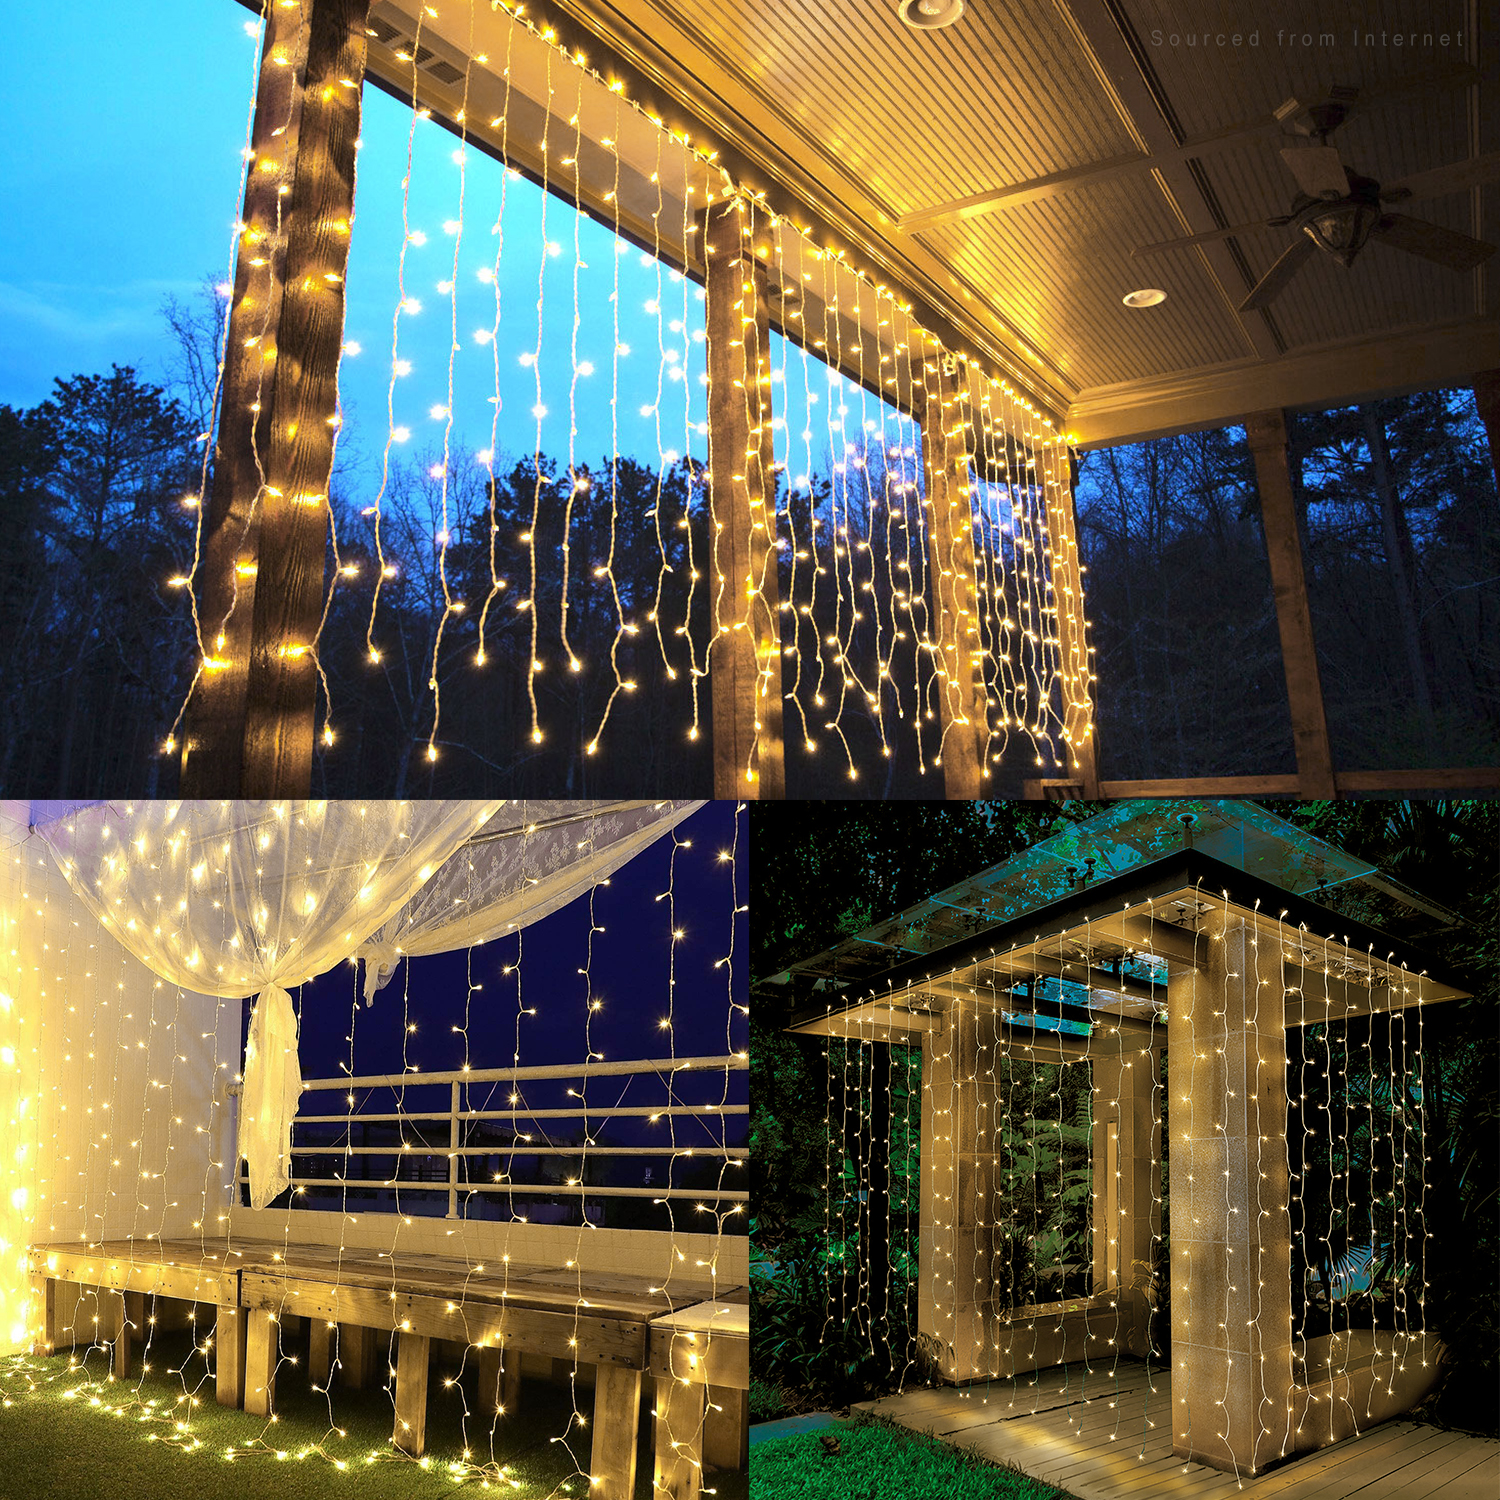 TORCHSTAR 9.8 x 9.8ft Window Curtain String Light, Waterproof LED Fairy Lights, 8 Modes Plug-in for Christmas Bedroom Party Wedding Home Garden Wall Decorations Warm White - image 5 of 7